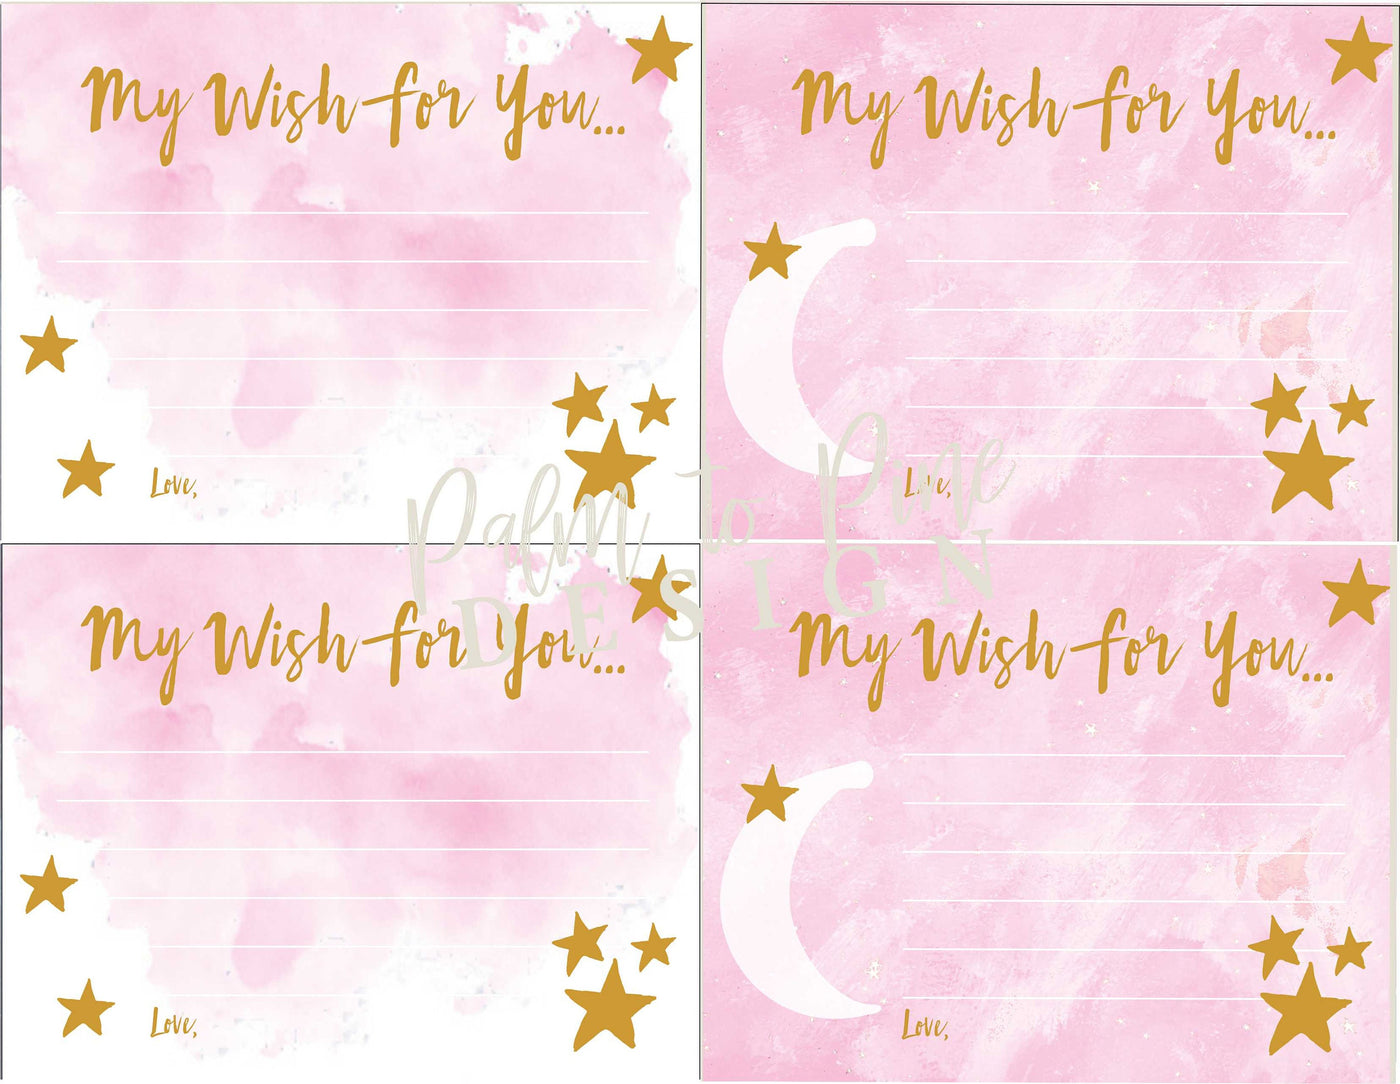 Baby Shower Wishes for Baby, Baby Shower Wishing Well, Baby Shower Wishes, Baby Shower Wish Cards, Wish Tree, Over the Moon, Twinkle Twinkle